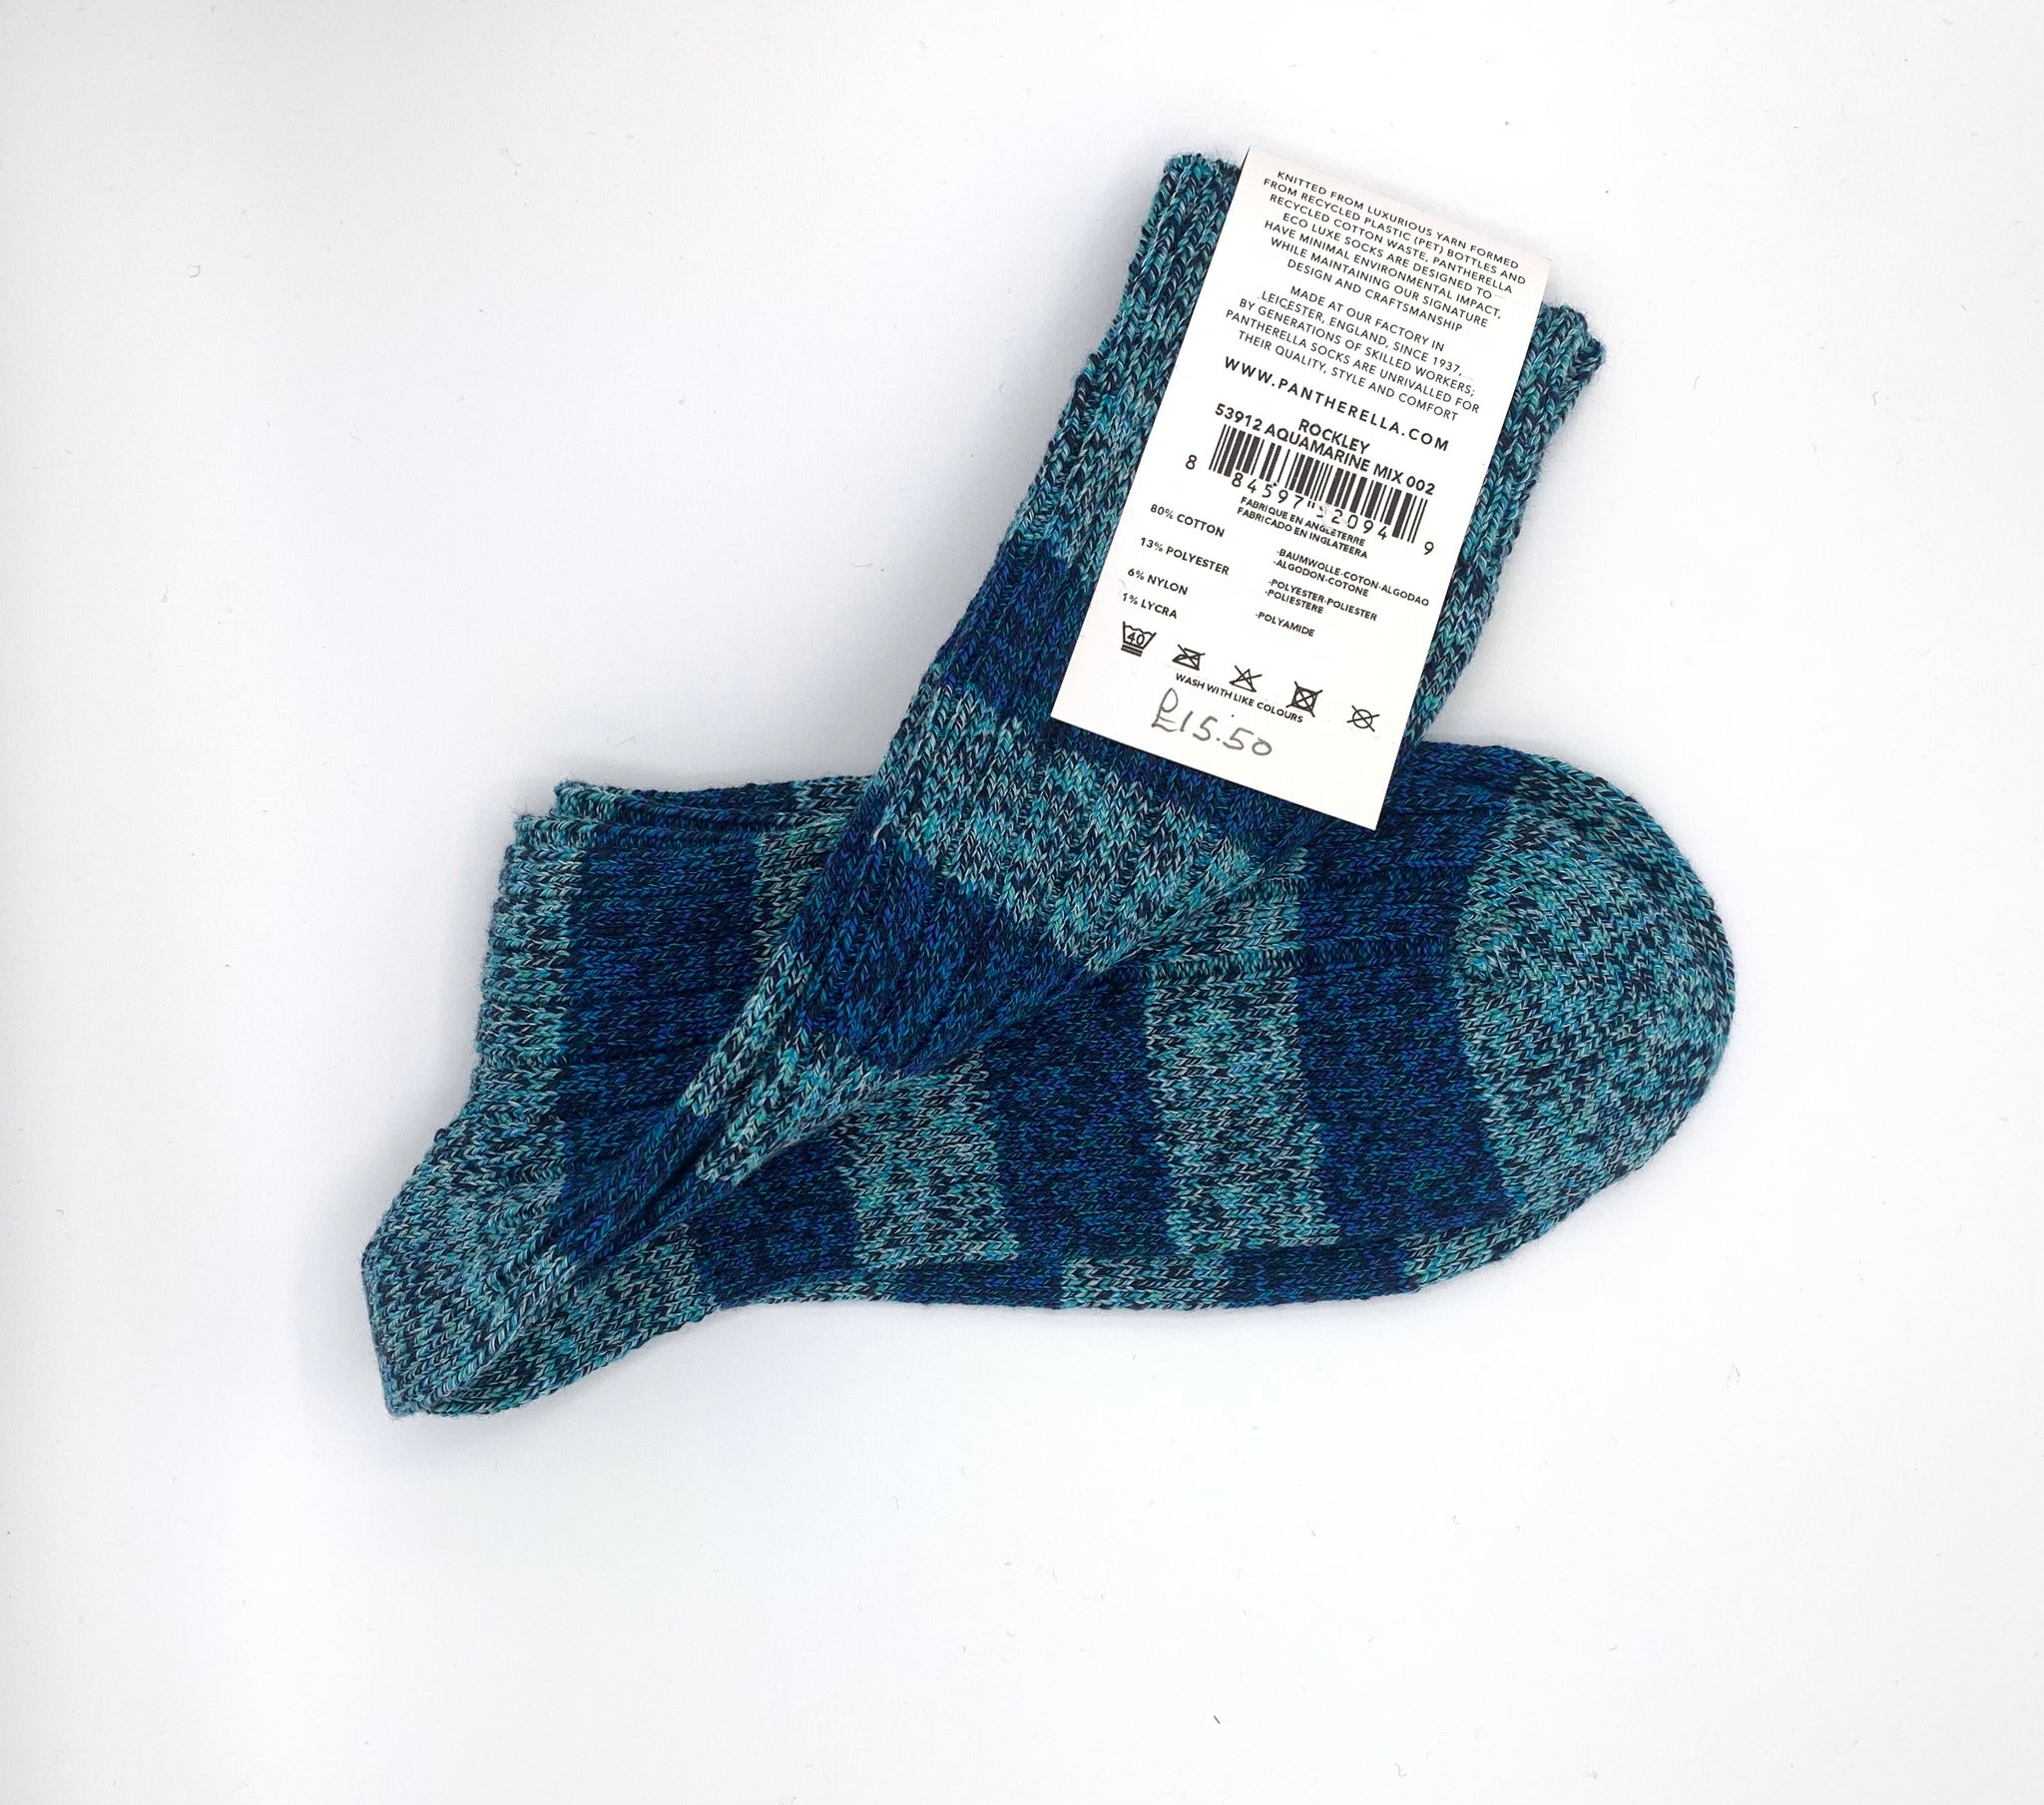 Quality, eco-friendly recycled-yarn UK-made thick socks made with super-warm, super-soft cotton from footwear royalty Pantherella, in a seaside blue with navy stripes. 